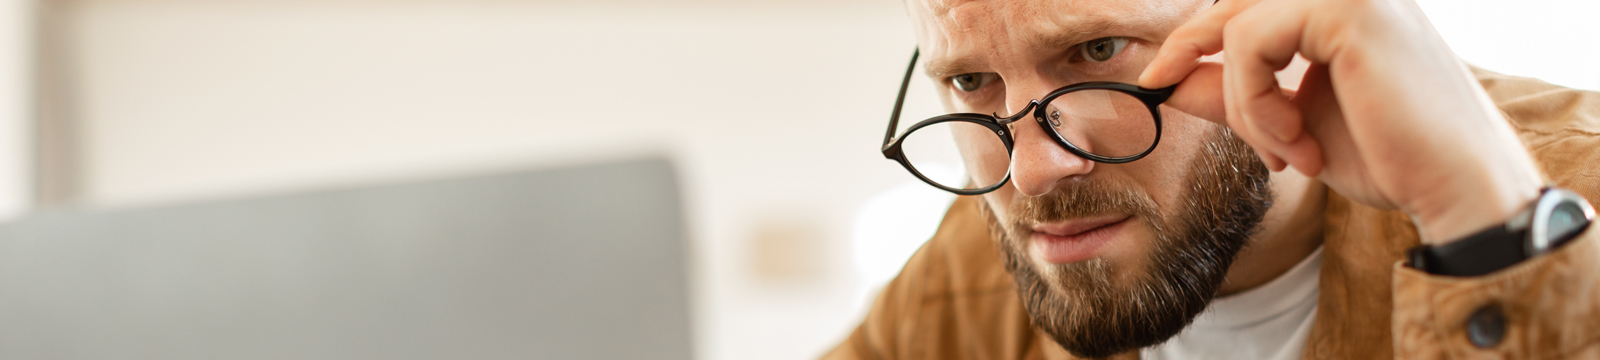 Man looking perplexed at laptop screen over top of his glasses